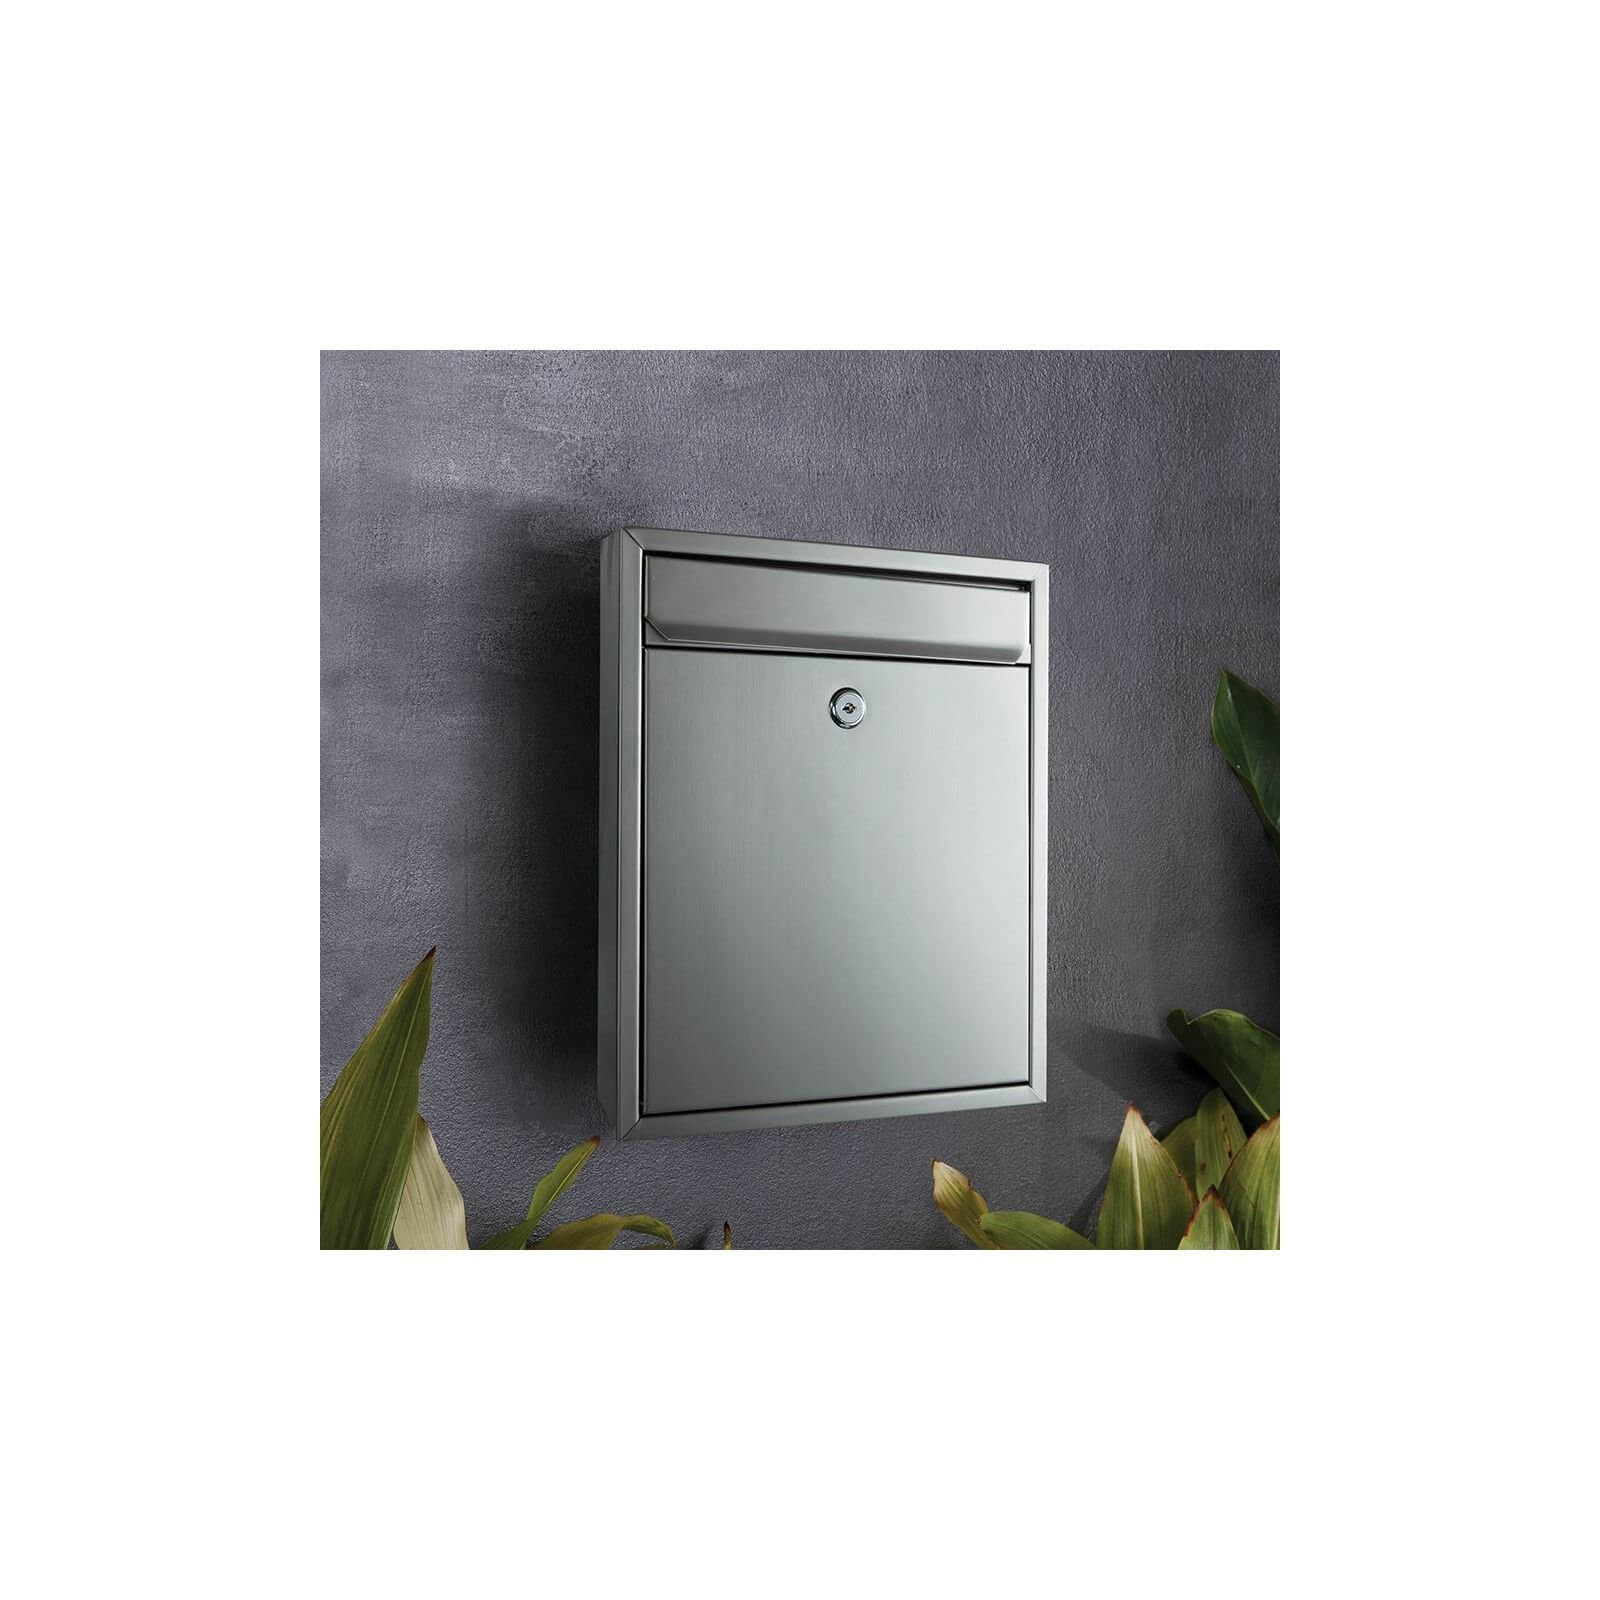 Sandleford Napoli Wall Mounted Mailbox - Stainless Steel